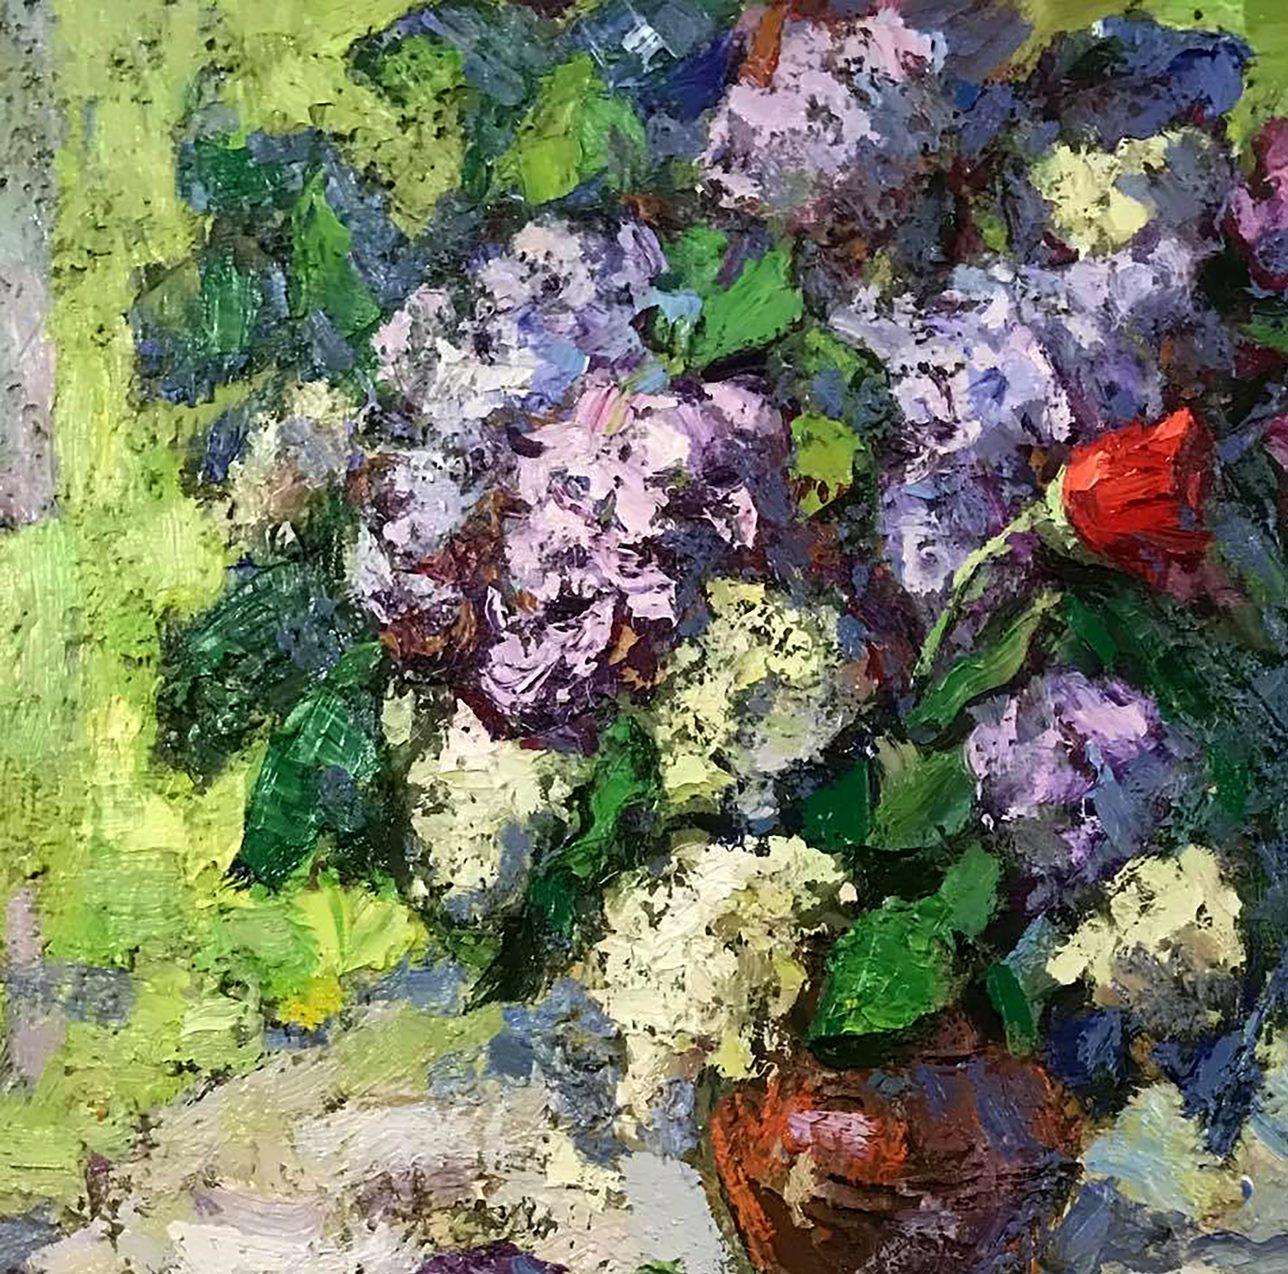 Artist: Alex Kalenyuk 
Work: Original oil painting, handmade artwork, one of a kind 
Medium: Oil on canvas 
Year: 208
Style: Impressionism
Title: Bouquet of Lilacs
Size: 31